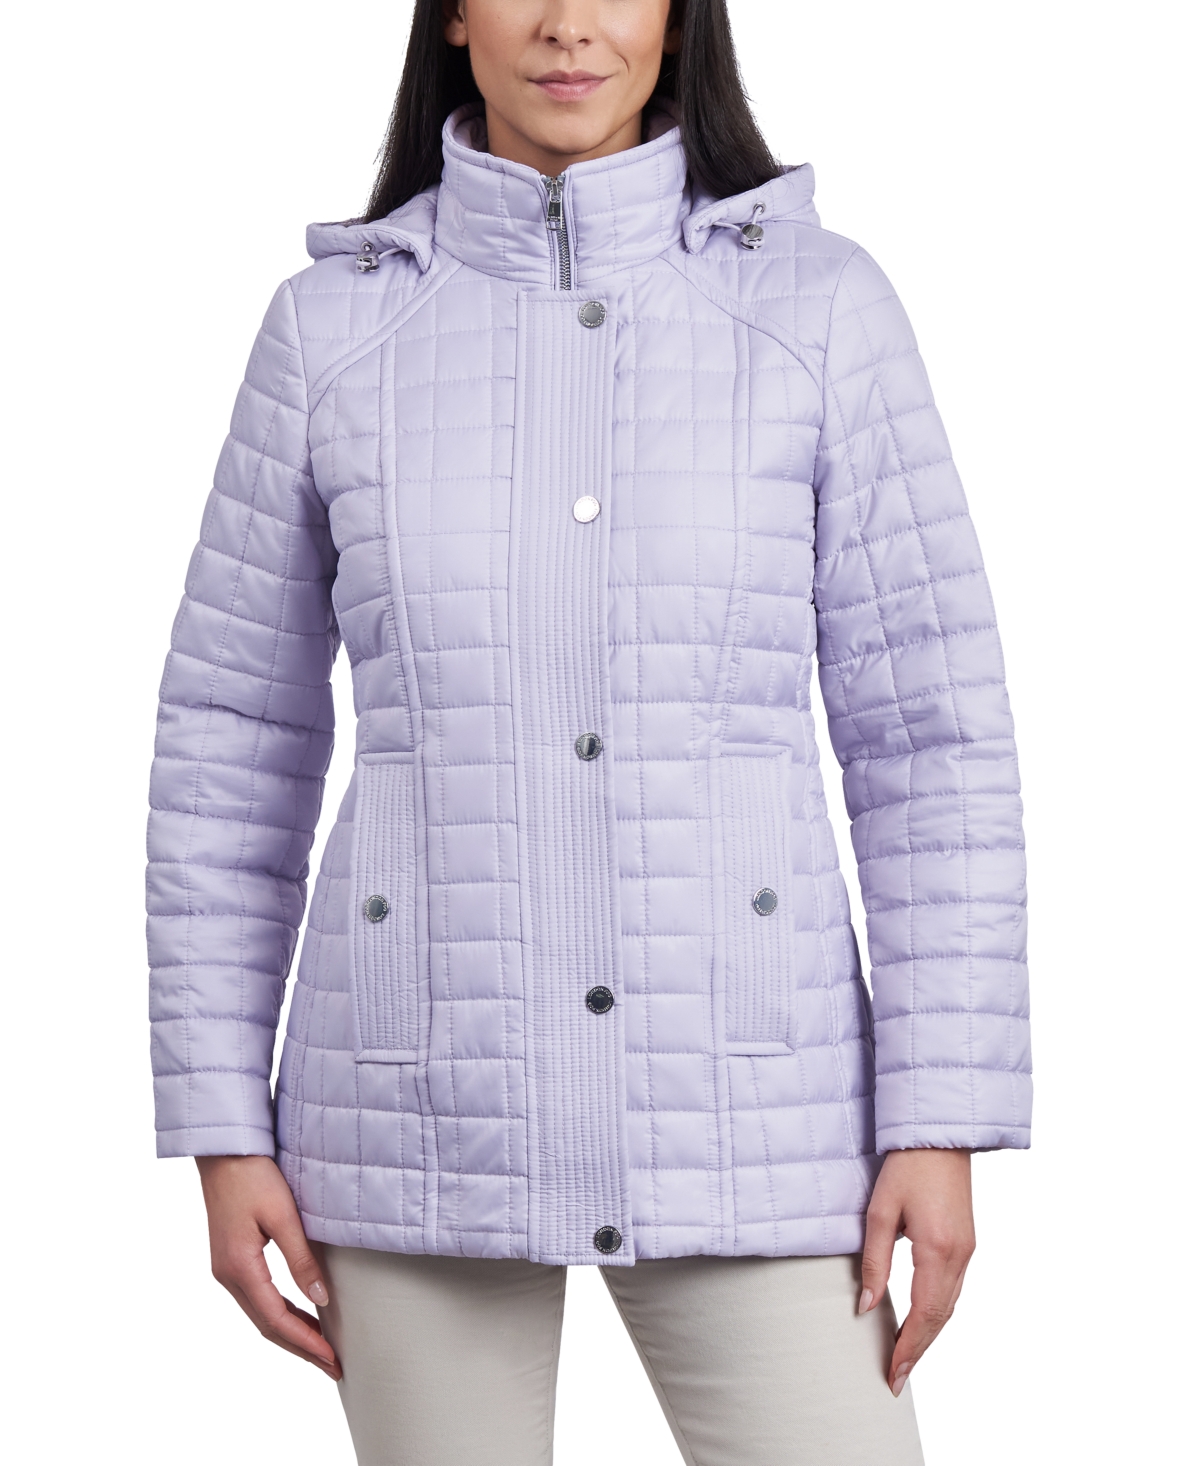 Women's Hooded Quilted Water-Resistant Coat - Lavender